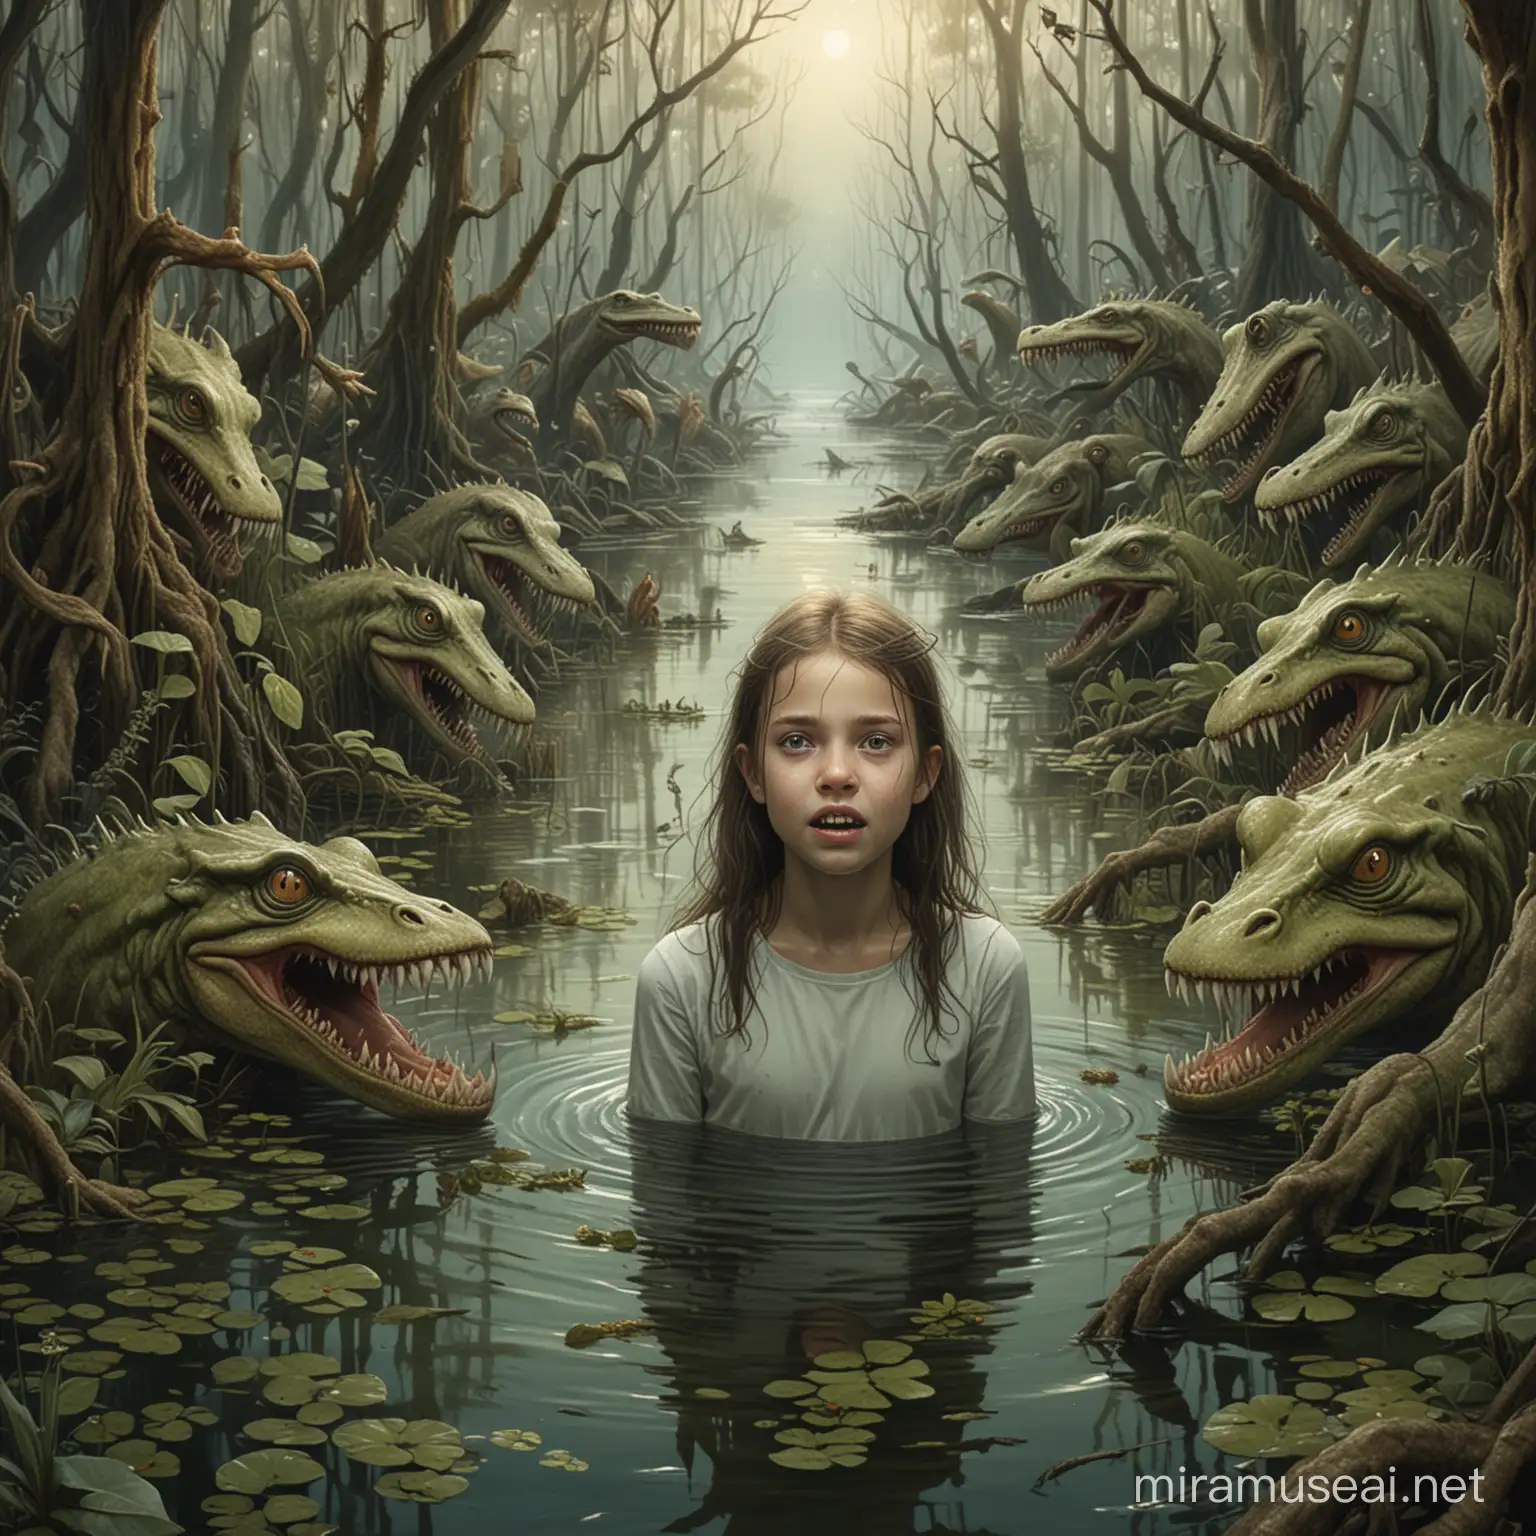 young girl with crocked teeth immerging from a swamp surrounded by mythical creatures in a the style of surrealism